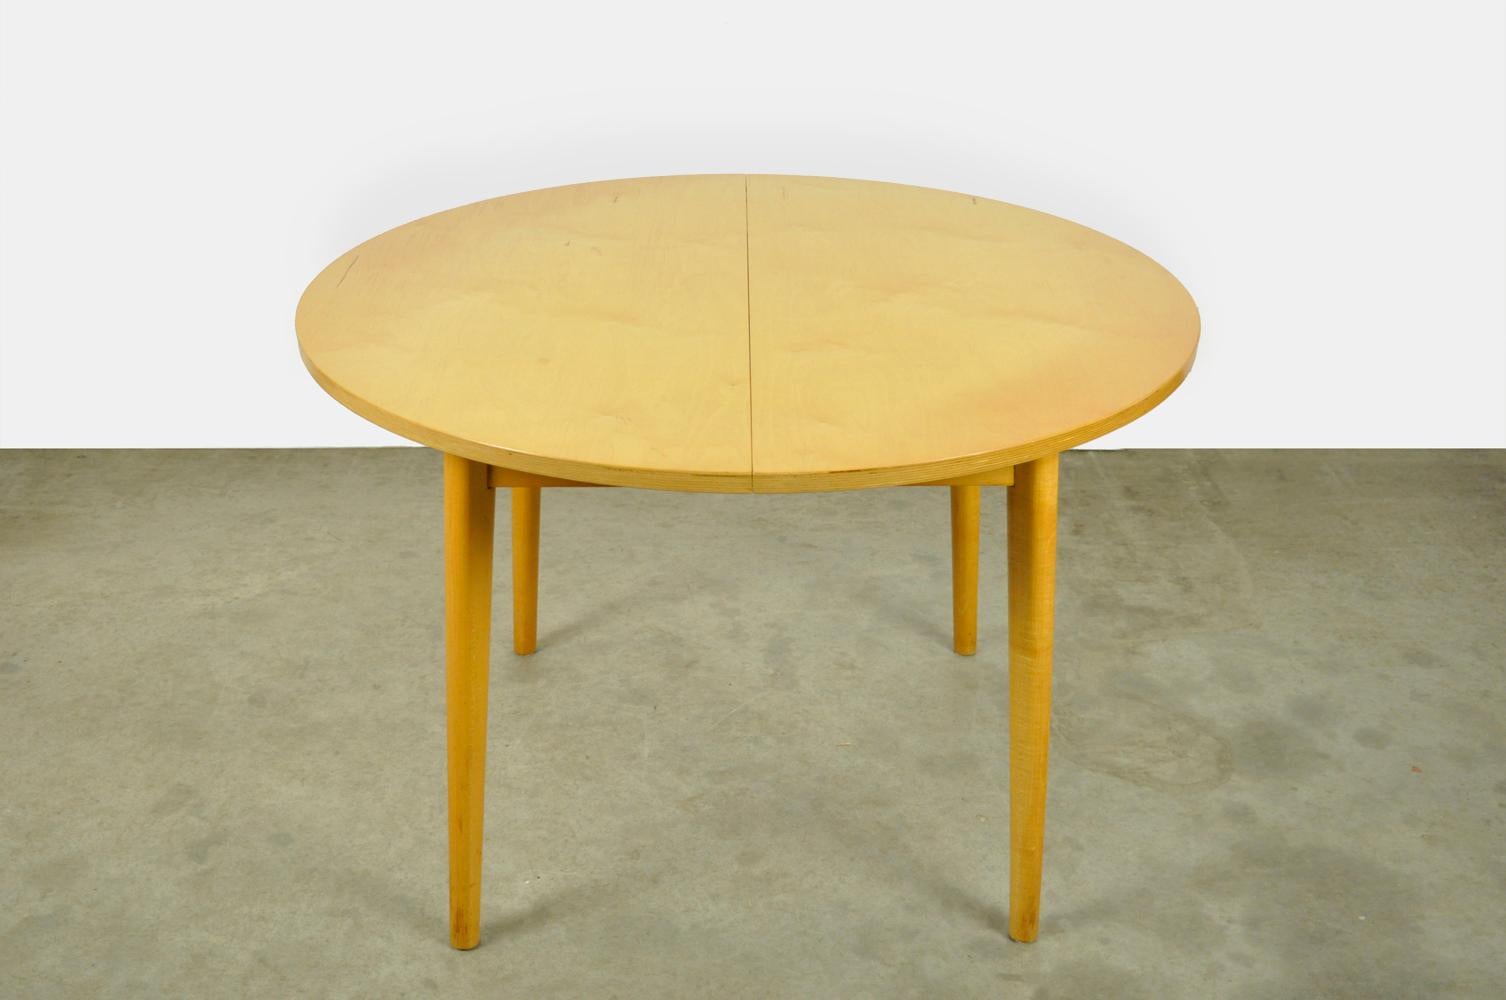 Scandinavian Modern Birch extendable wooden dining table 4-6 people in Pastoe style, 1960s For Sale